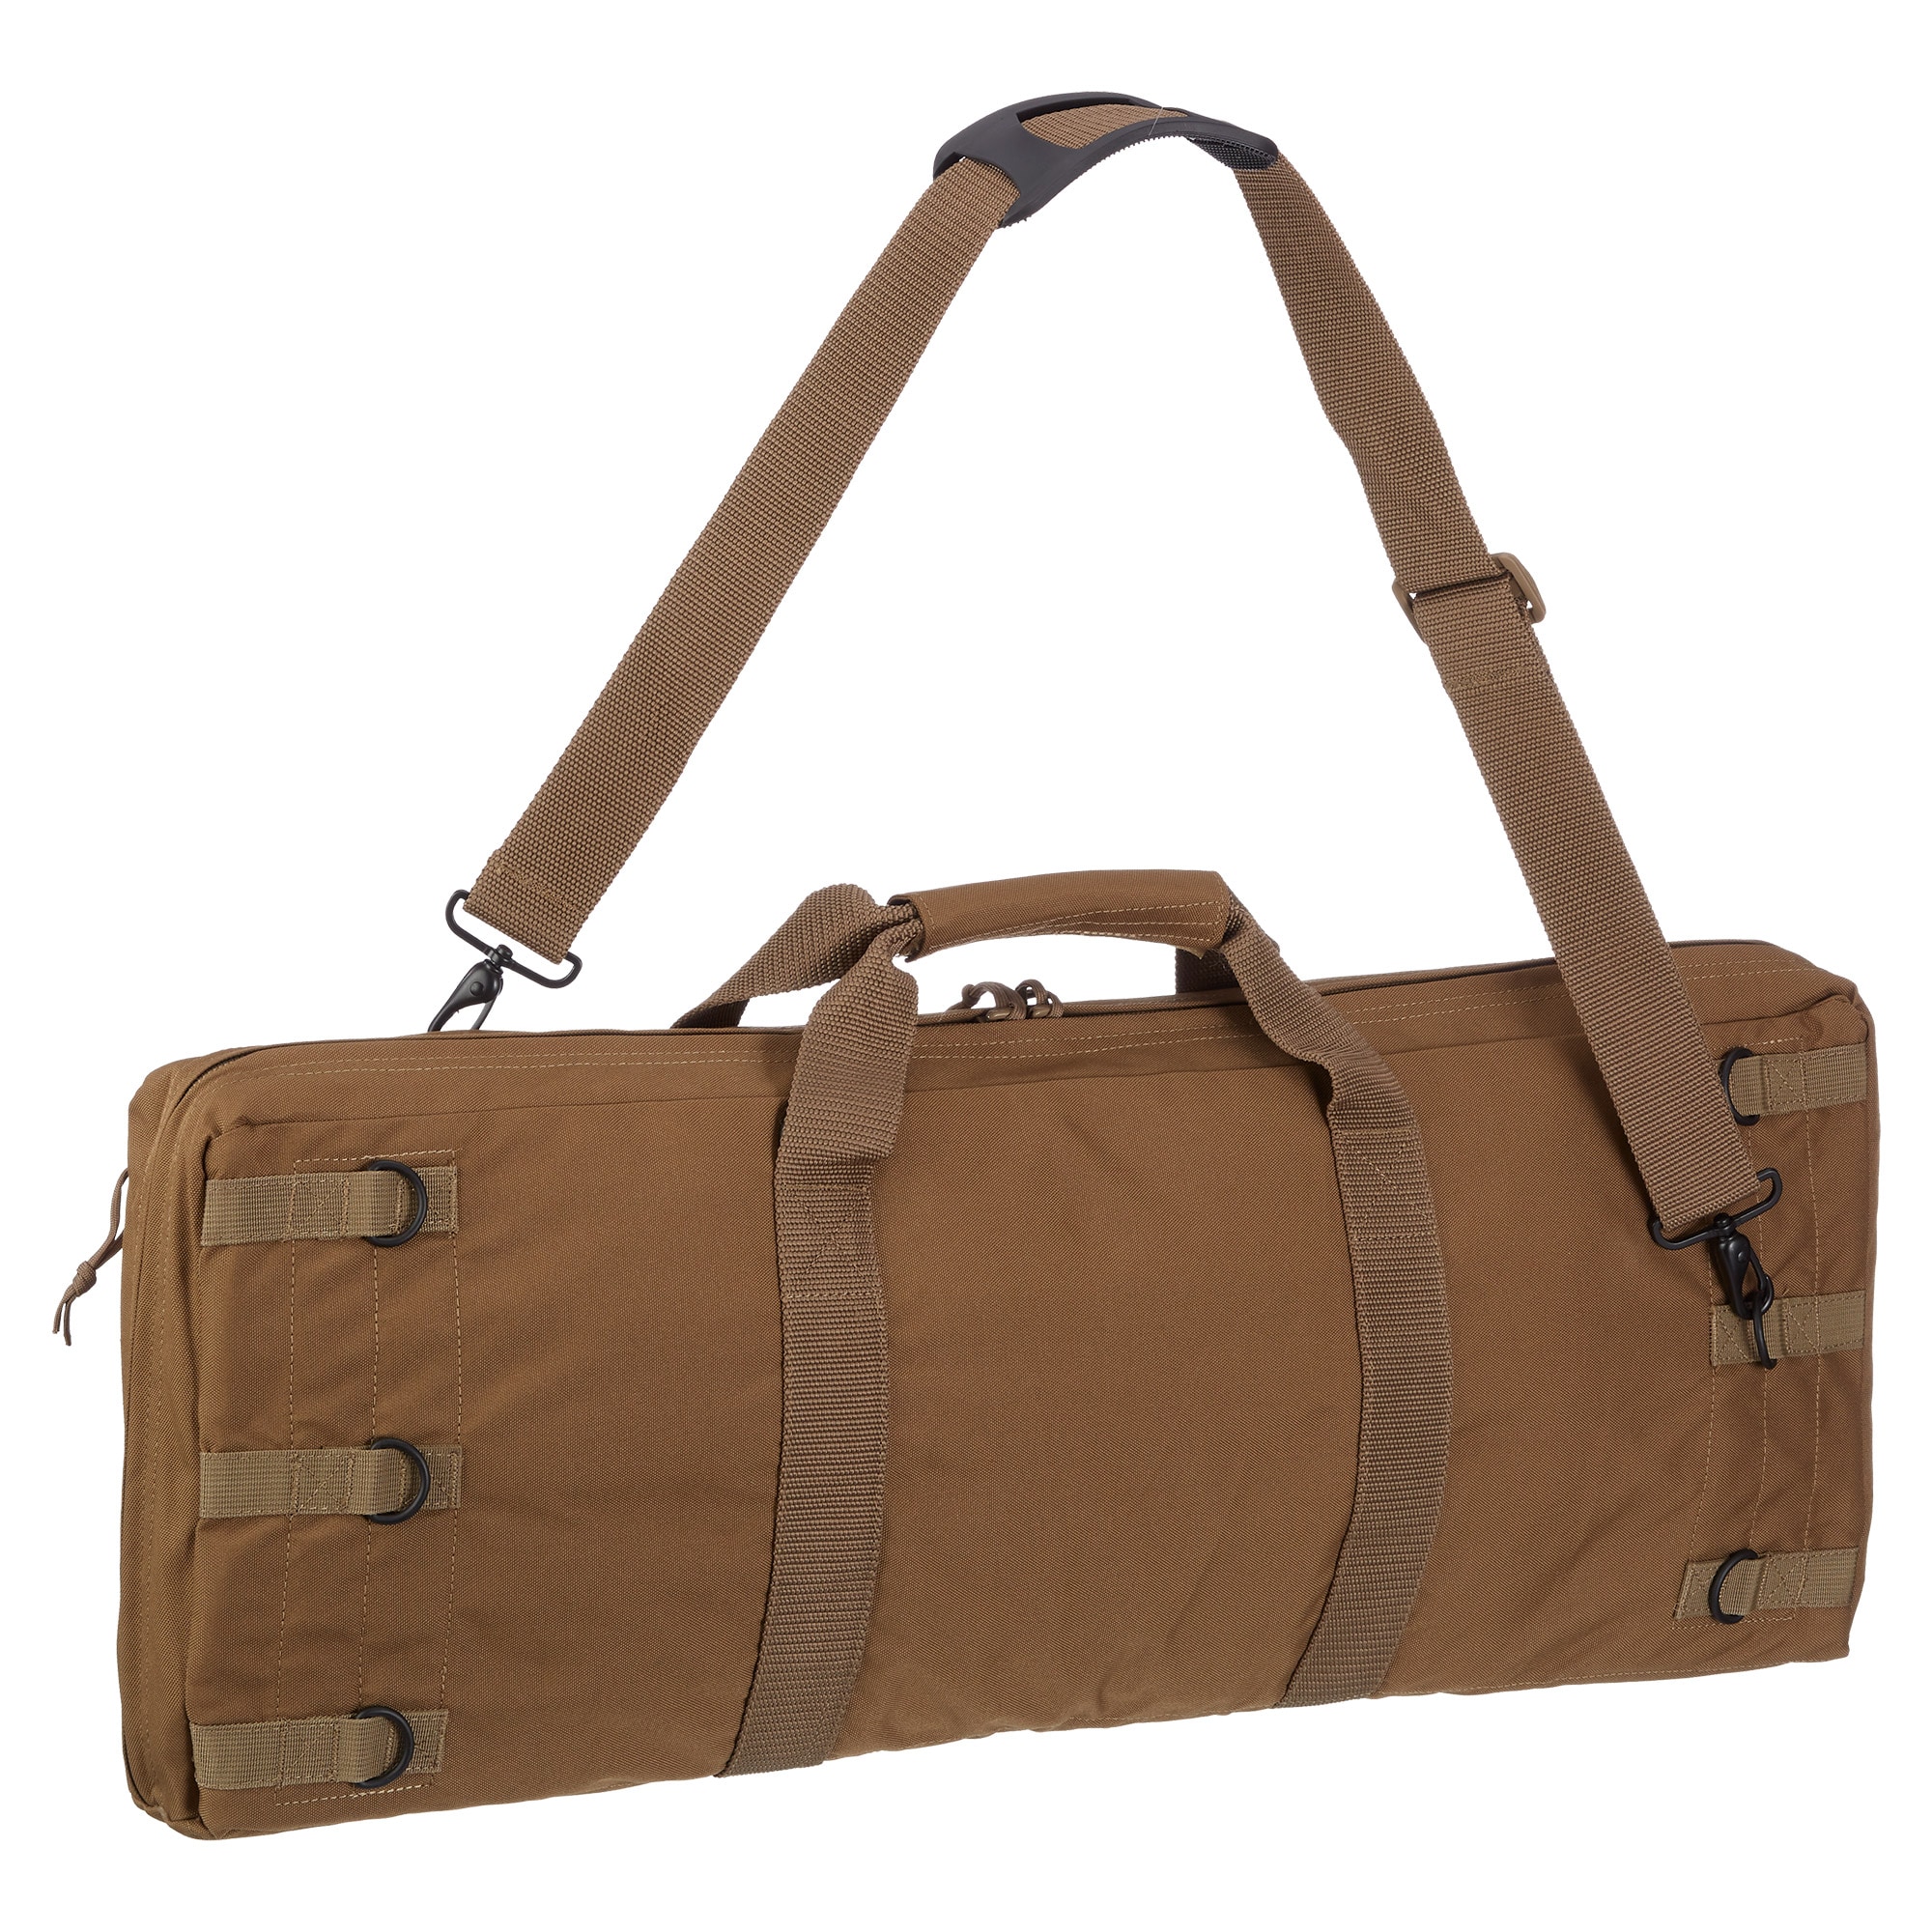 Purchase the Invader Gear Padded Rifle Carrier 80 cm tan by ASMC